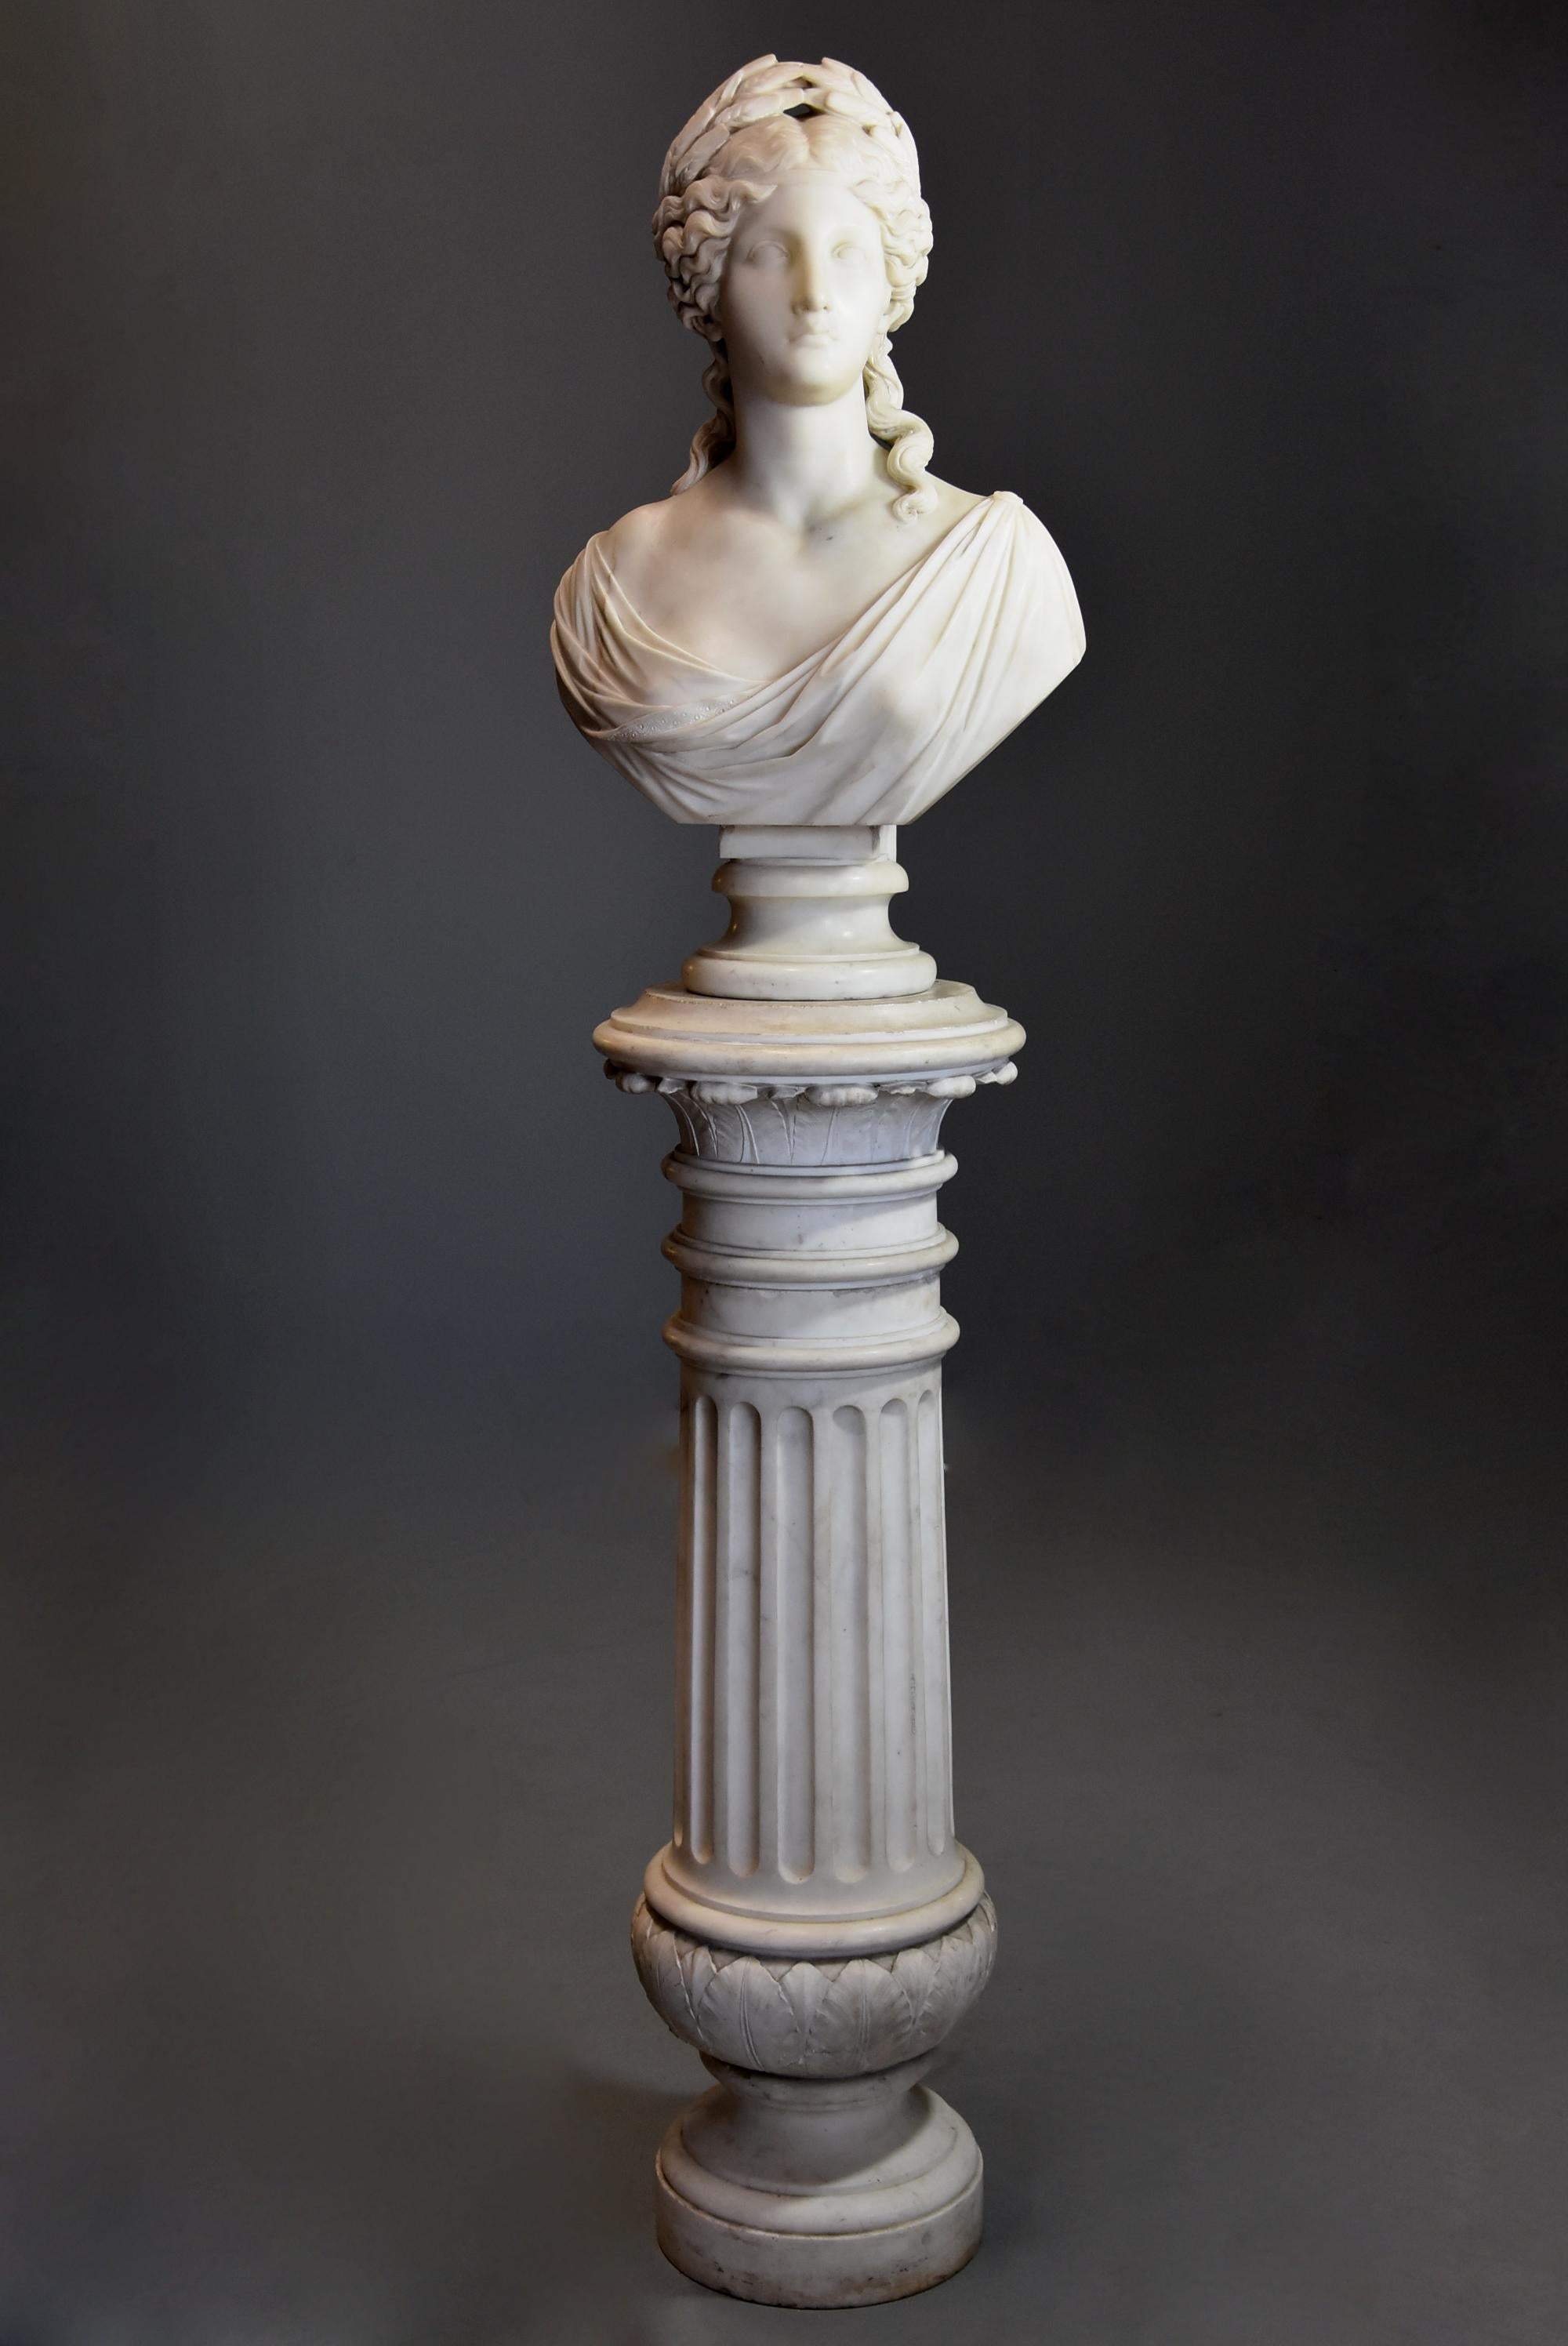 A 19th century life-size finely carved Carrara marble bust of the Roman Goddess, Ceres or her Greek equivalent, Demeter supported on original carved Carrara marble column in the classical style, signed ‘S. KITSON, Fecit 18ROMA74’ (fecit translating